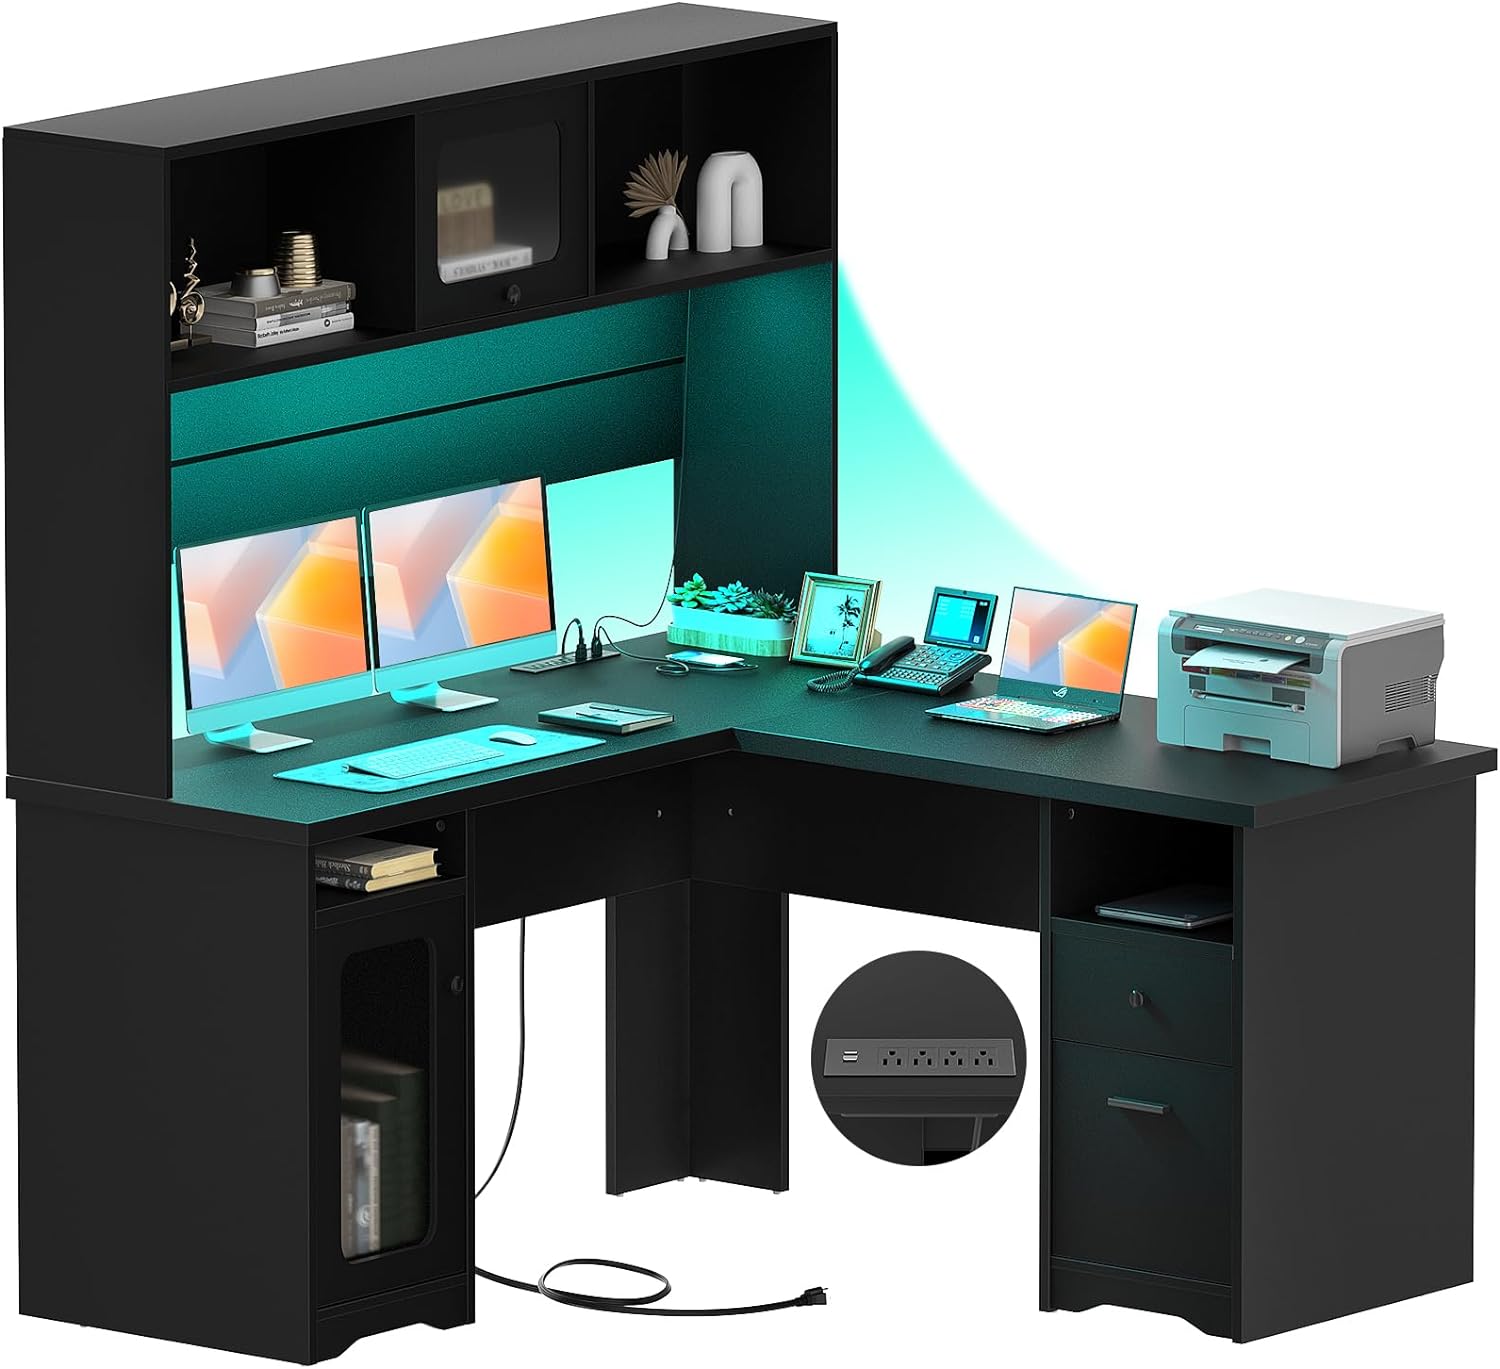 Unikito L Shaped Office Desk with Hutch, 60 Inch Computer Desk with Power Outlet and LED Lights, Large Modern Corner Desk with File Drawers, Sturdy 2 Person Home Office Gaming Table, Black